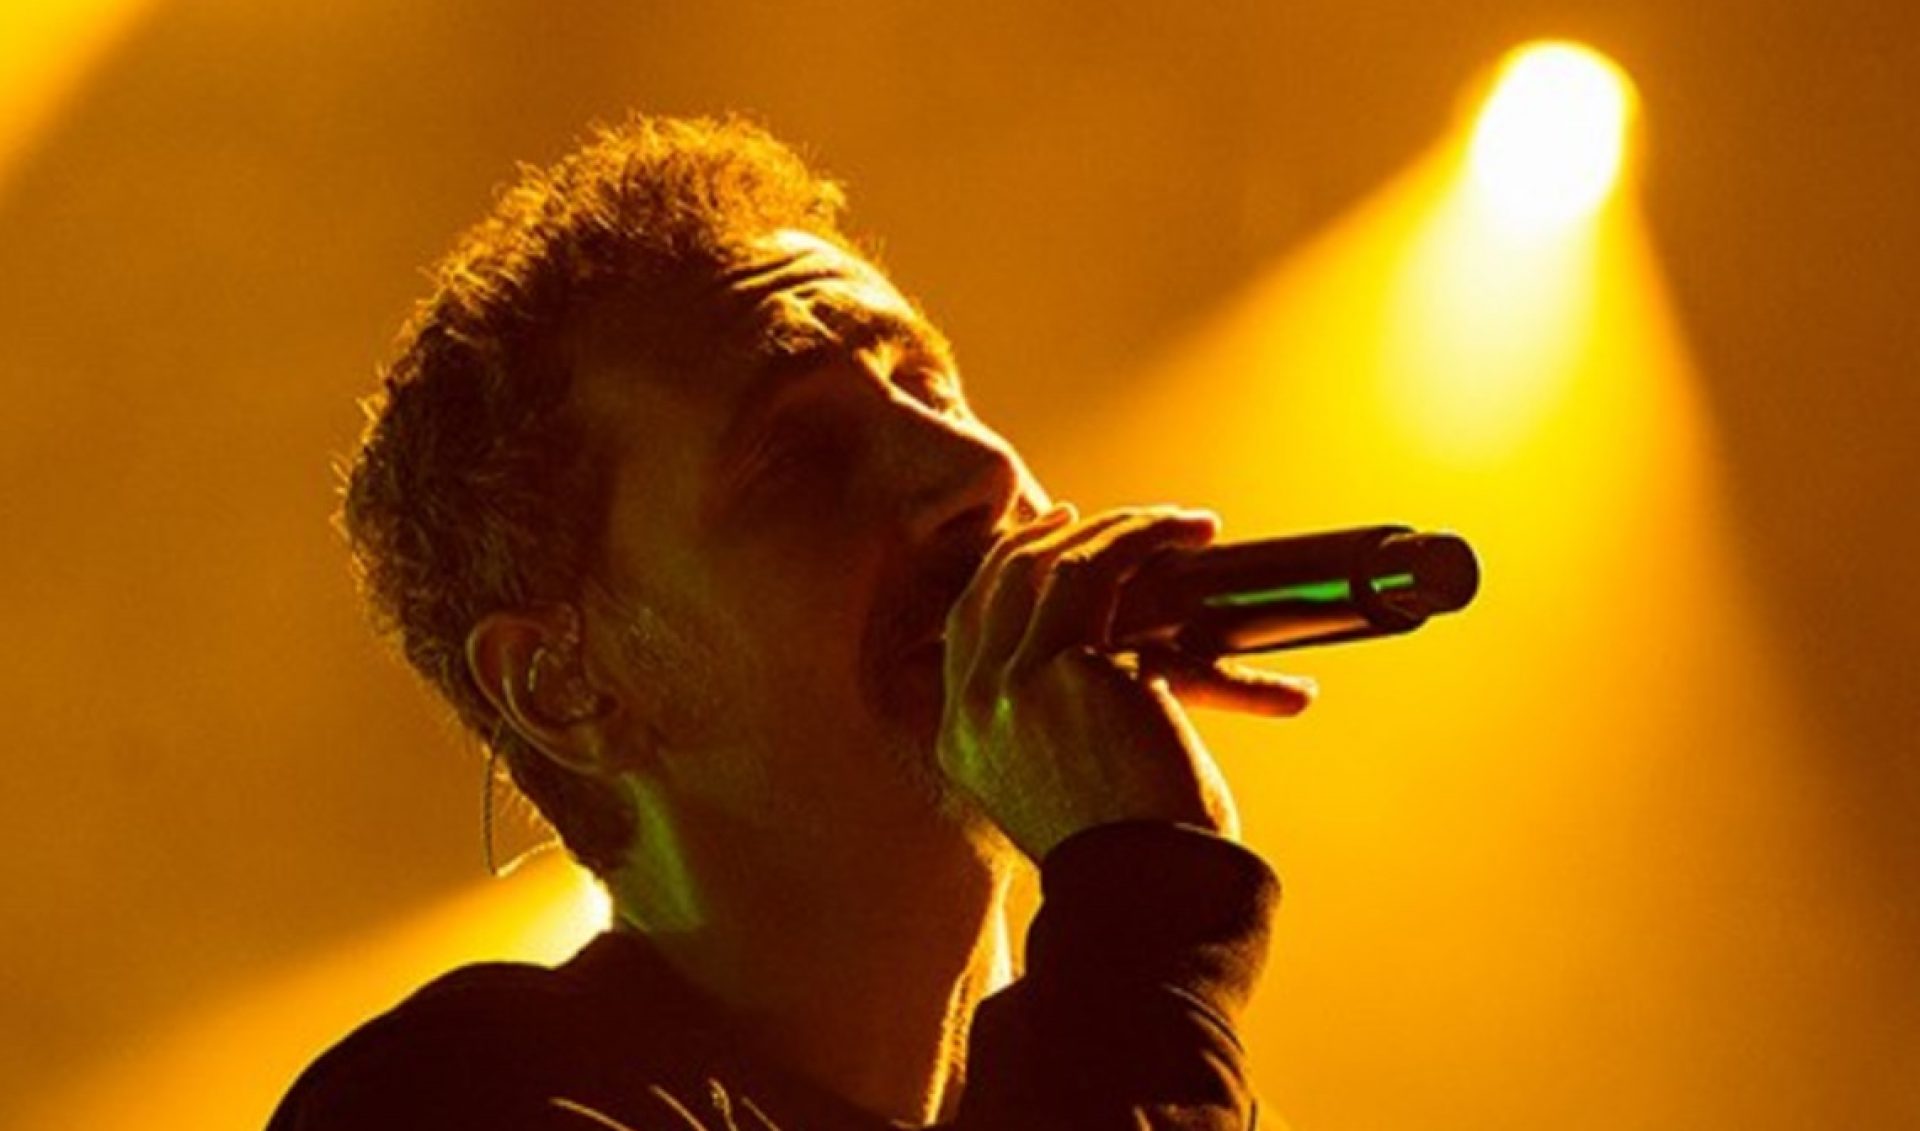 Musician And Patreon Investor Serj Tankian Launches Page On Platform